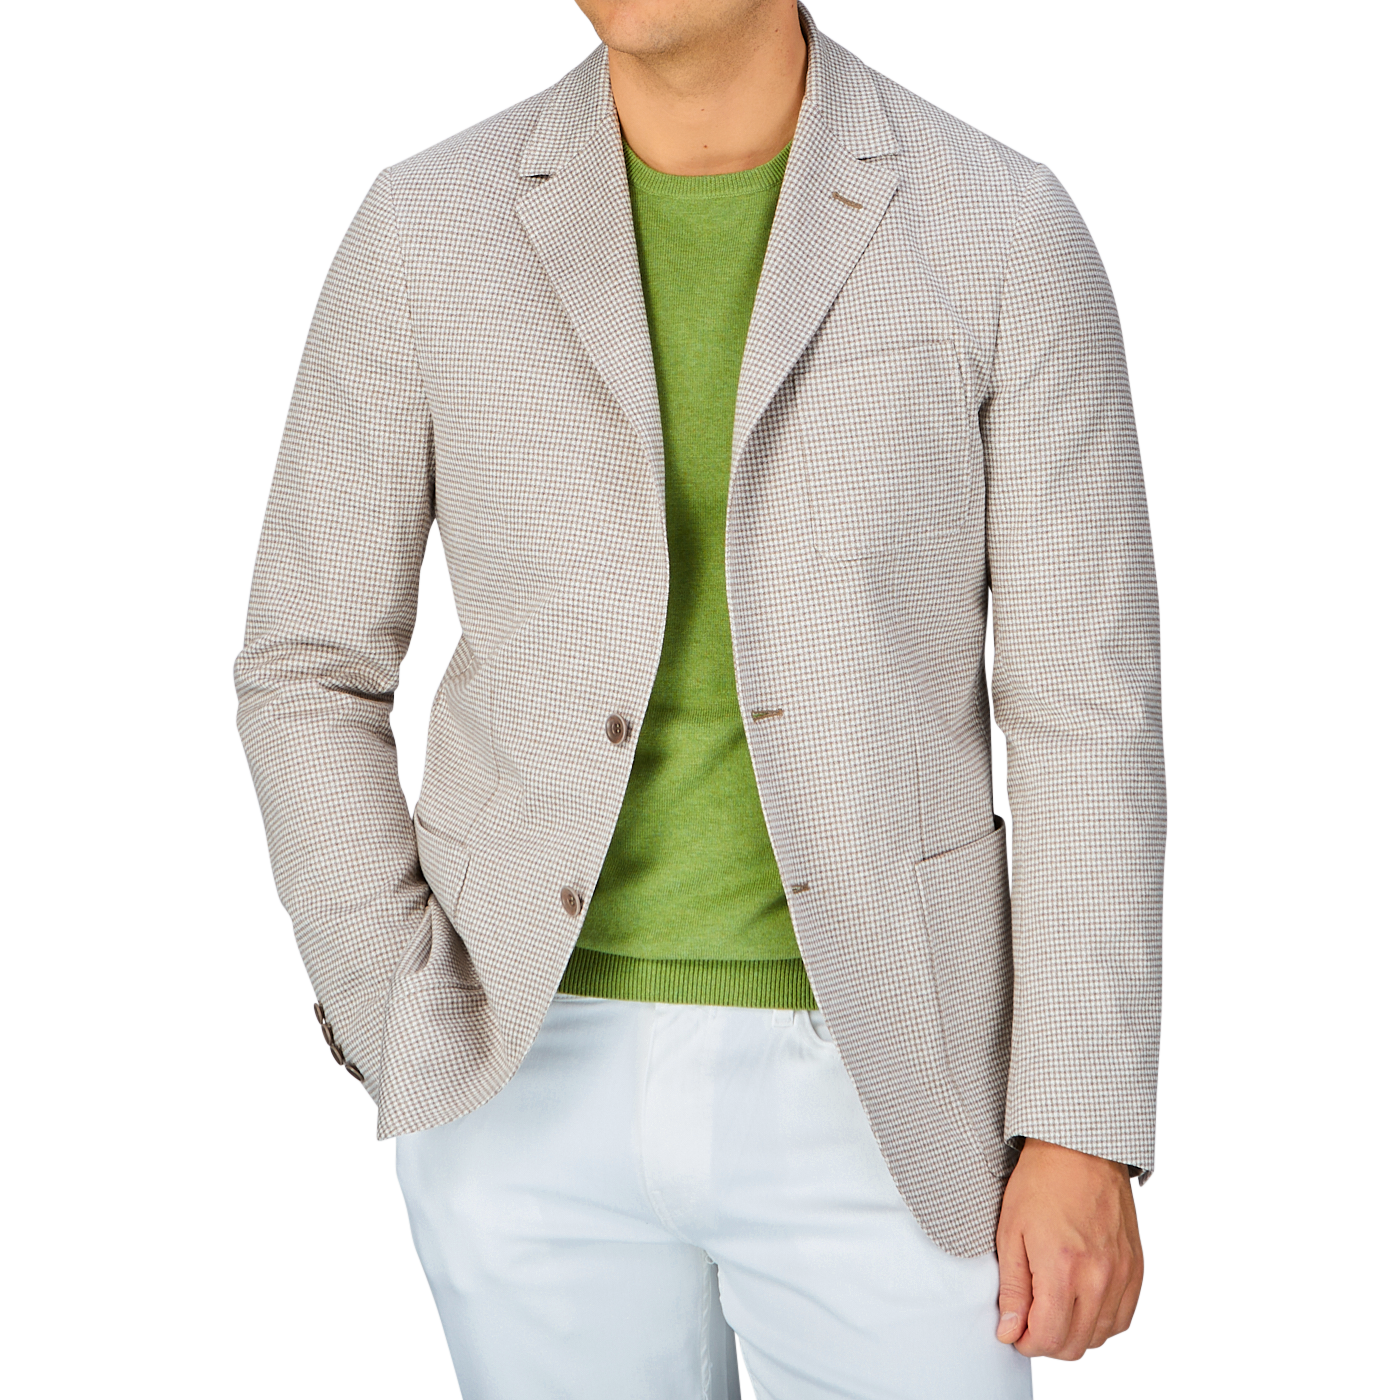 Man wearing a Canali Beige Houndstooth Cotton Jersey Blazer, green t-shirt, and white pants.